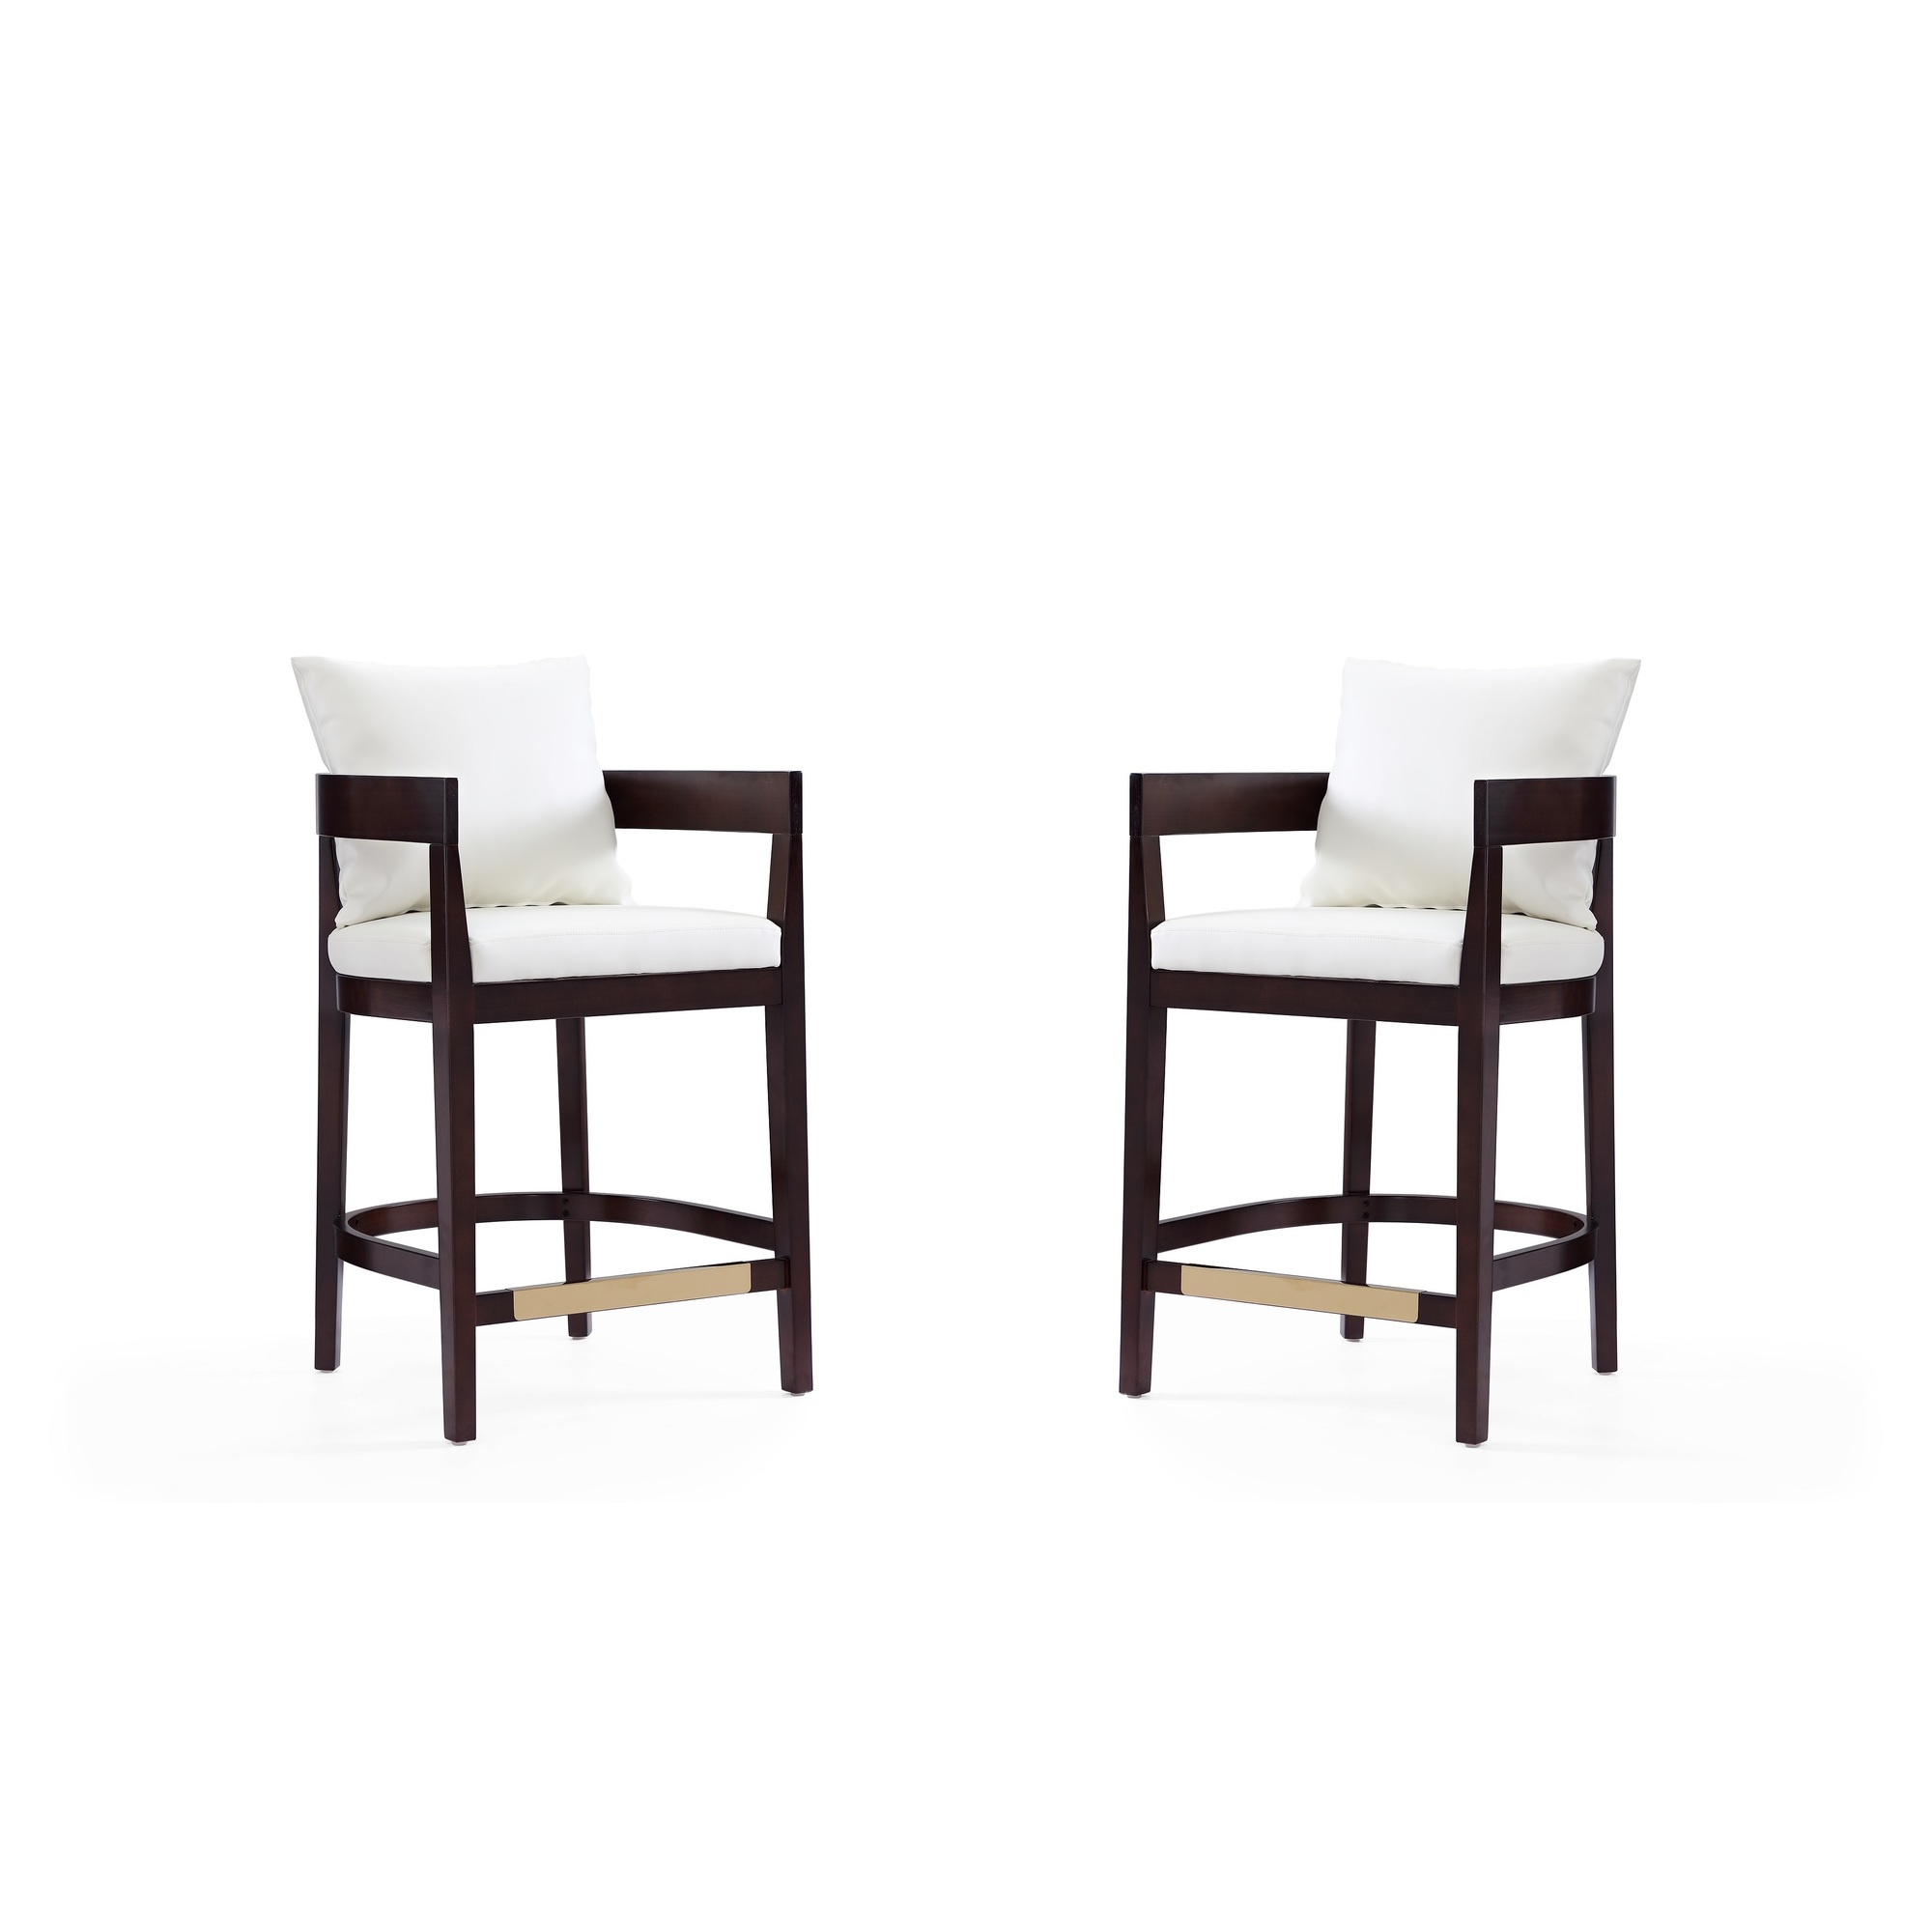 Manhattan Comfort, Ritz 34Inch Ivory Beech Wood Stool Set of 2 Primary Color Ivory, Included (qty.) 2 Model 2-CS006